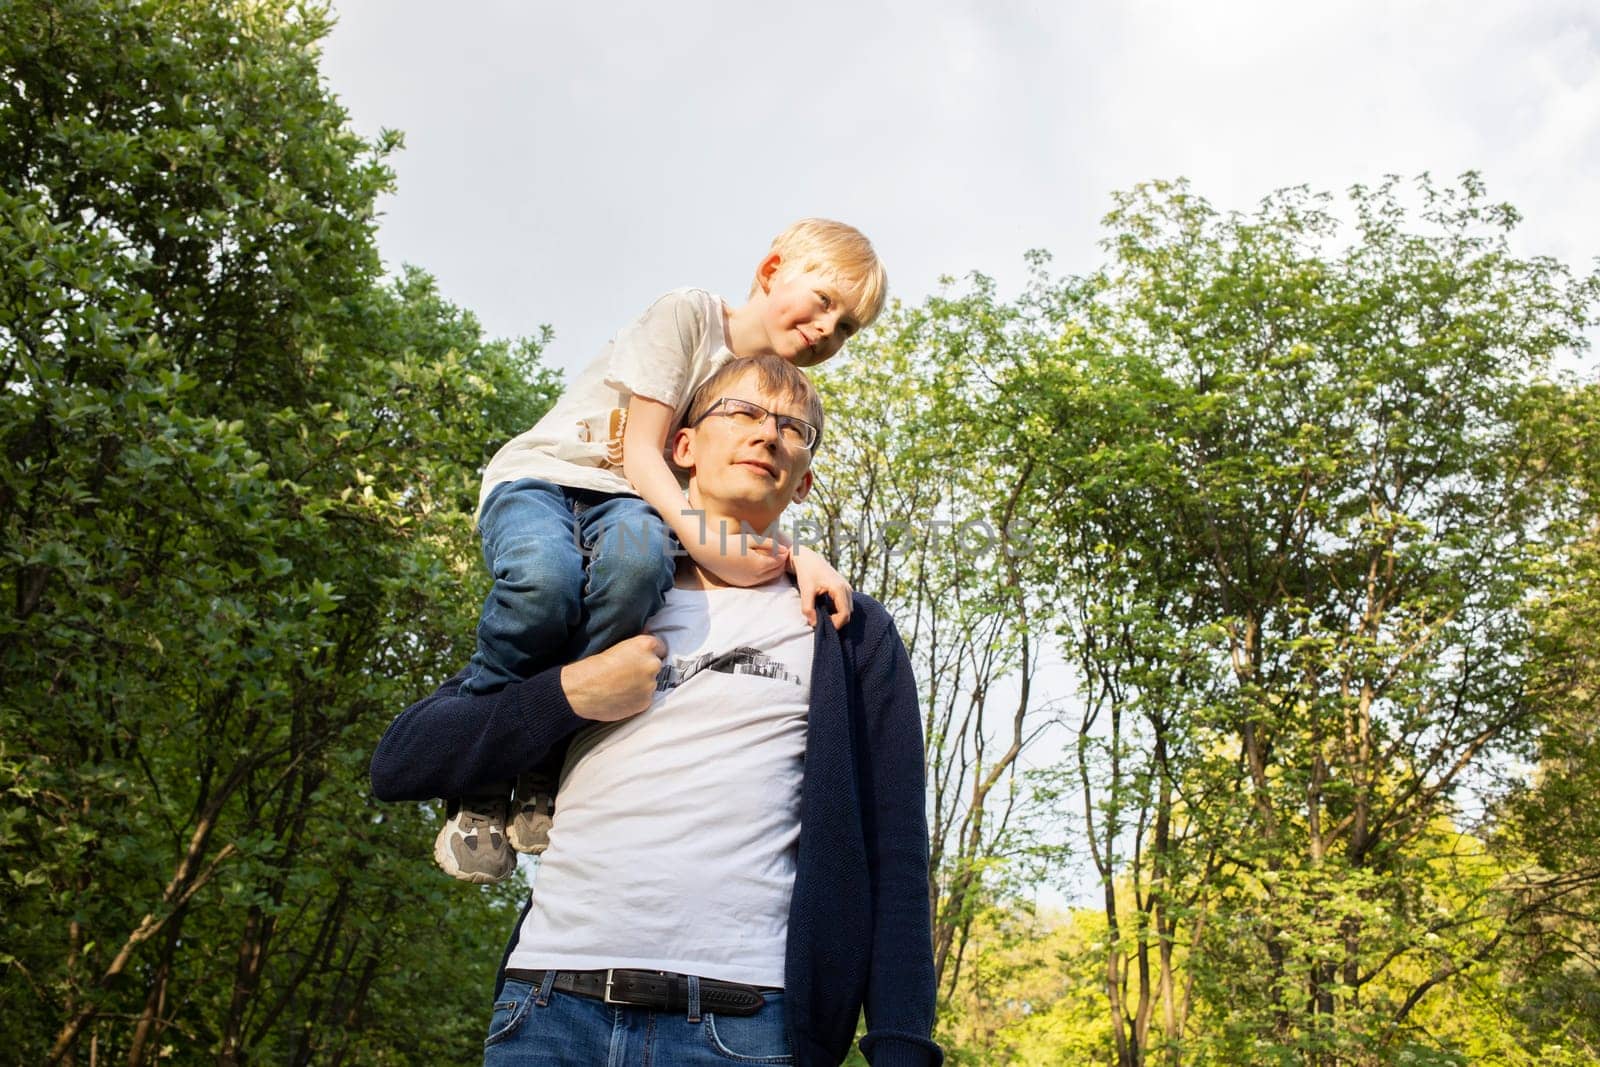 Father Carried Little Child, Son On Shoulder While Walking In Park. Summer Time. Happy Parenthood, Family Leisure Time. Emotional Connection, Love And Care. Horizontal Plane. High quality photo